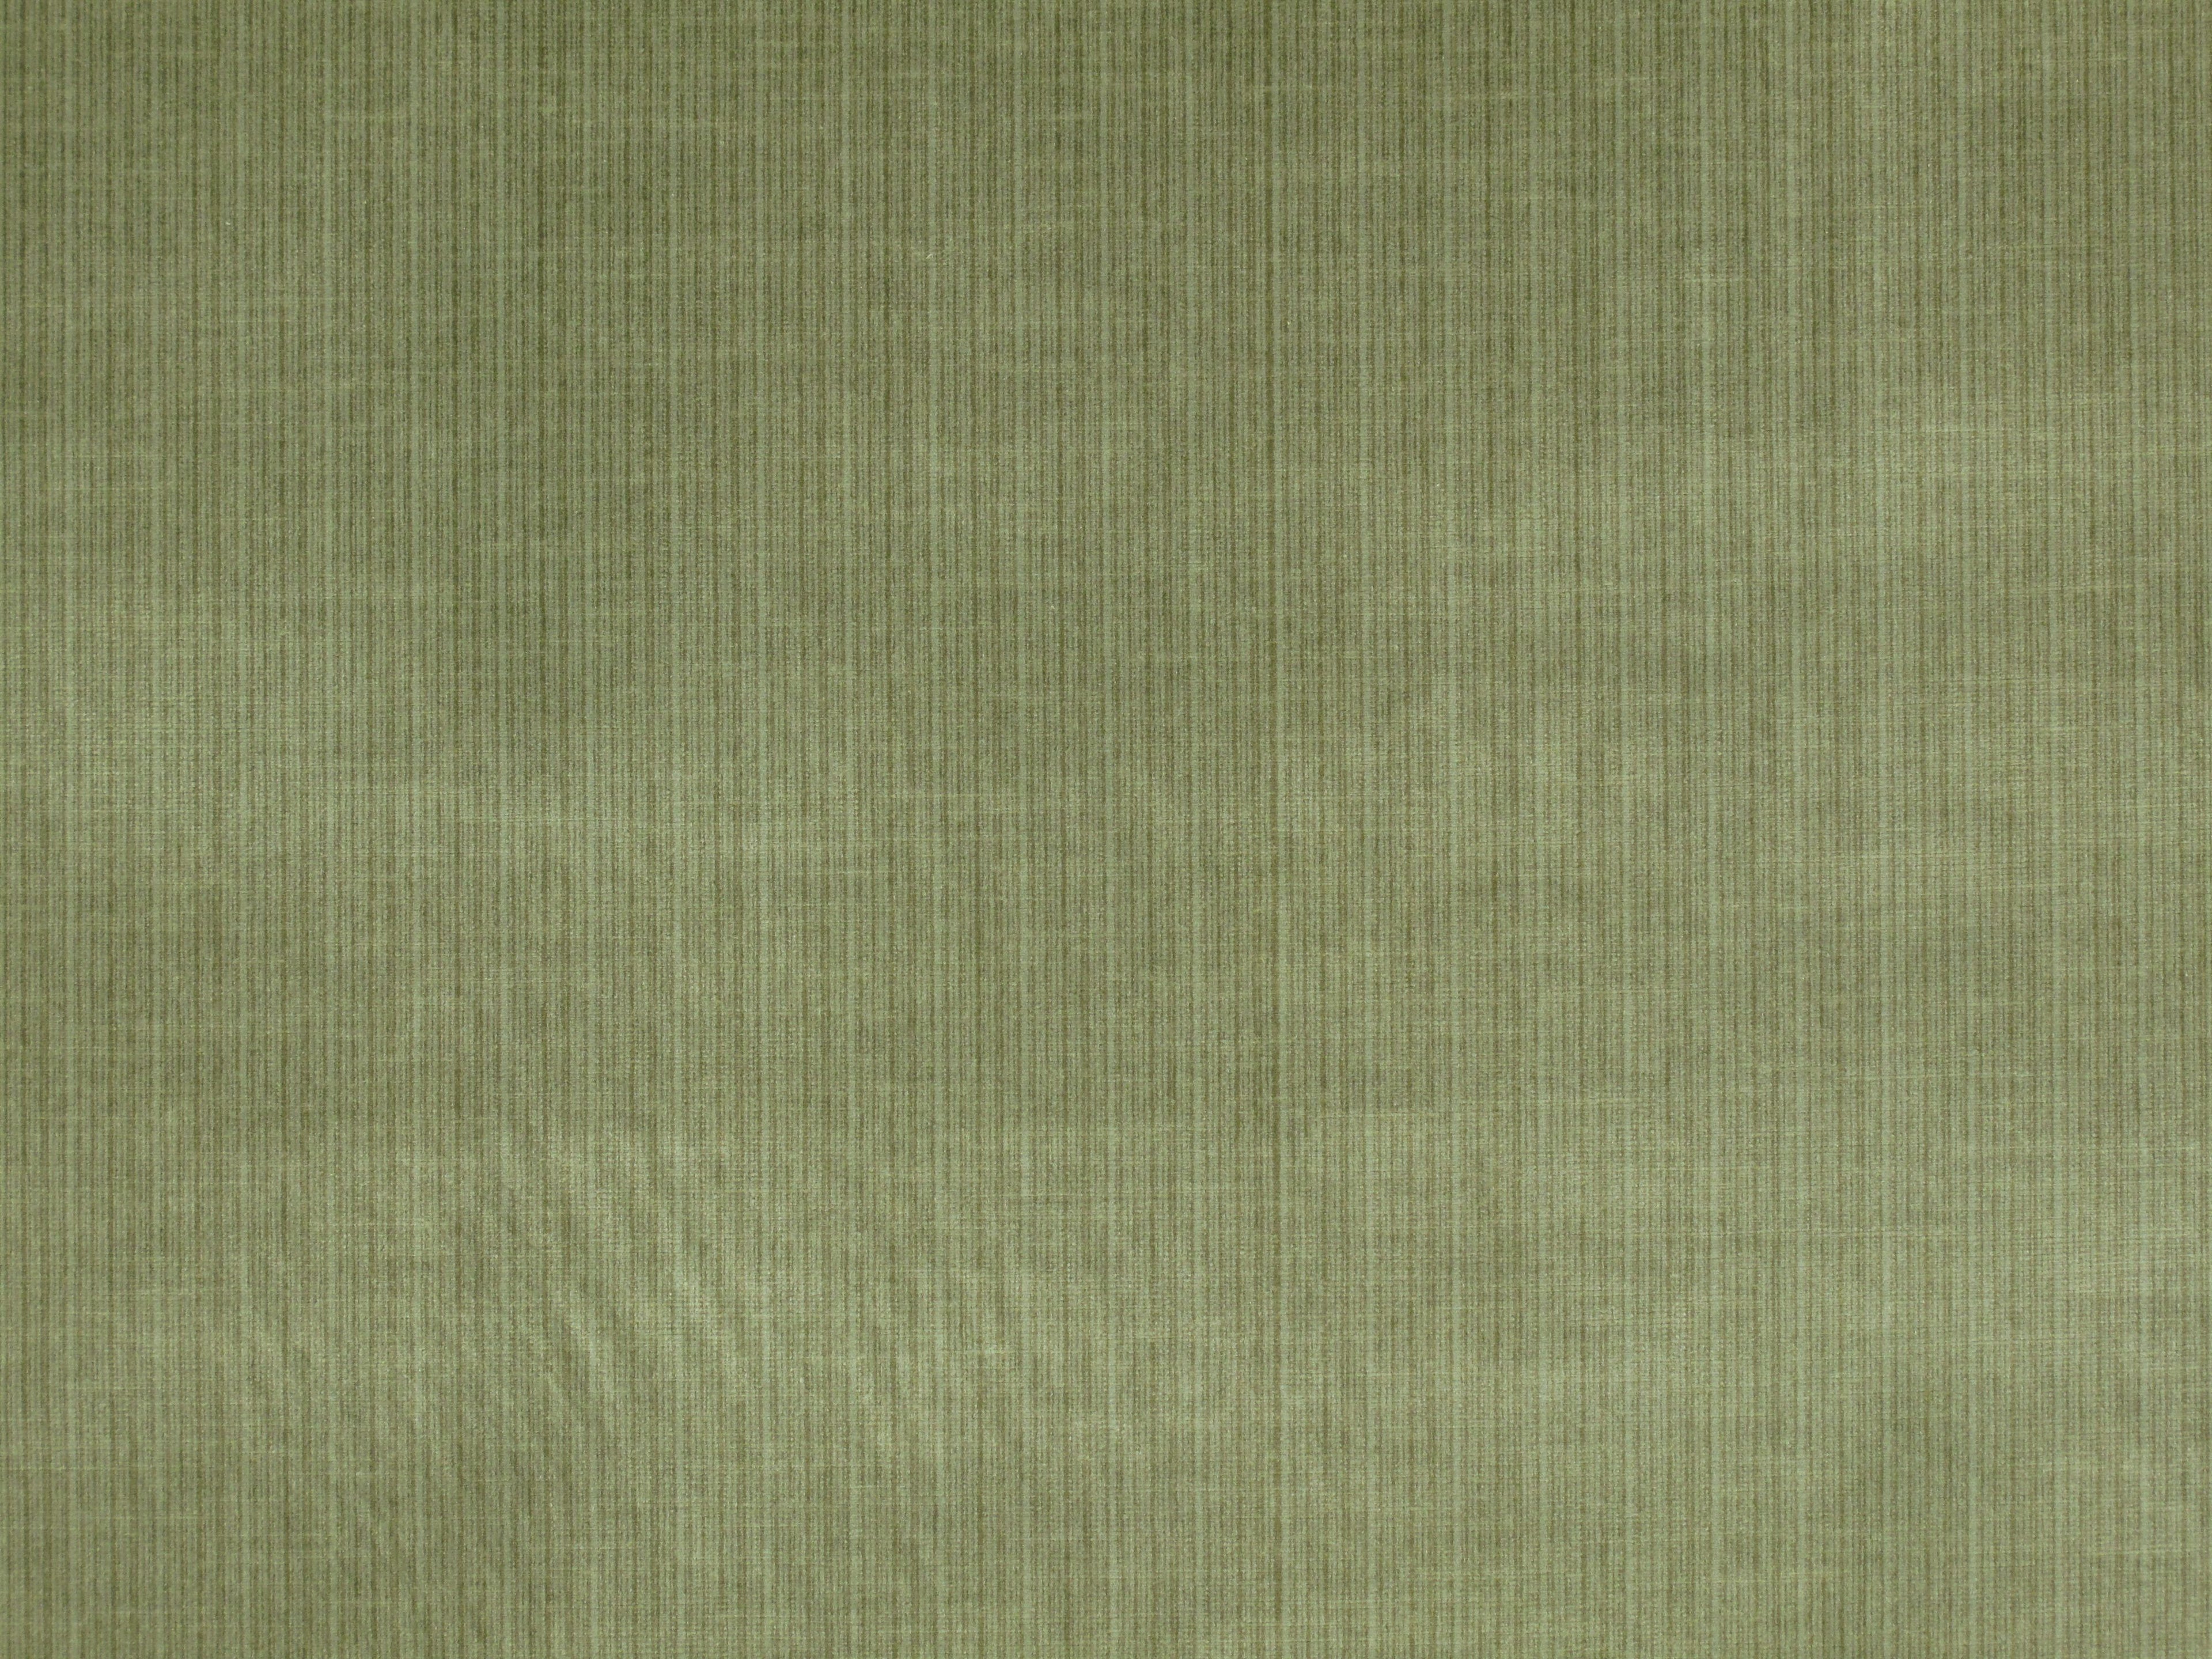 Strie Amboise fabric in sage color - pattern number JB 06548416 - by Scalamandre in the Old World Weavers collection